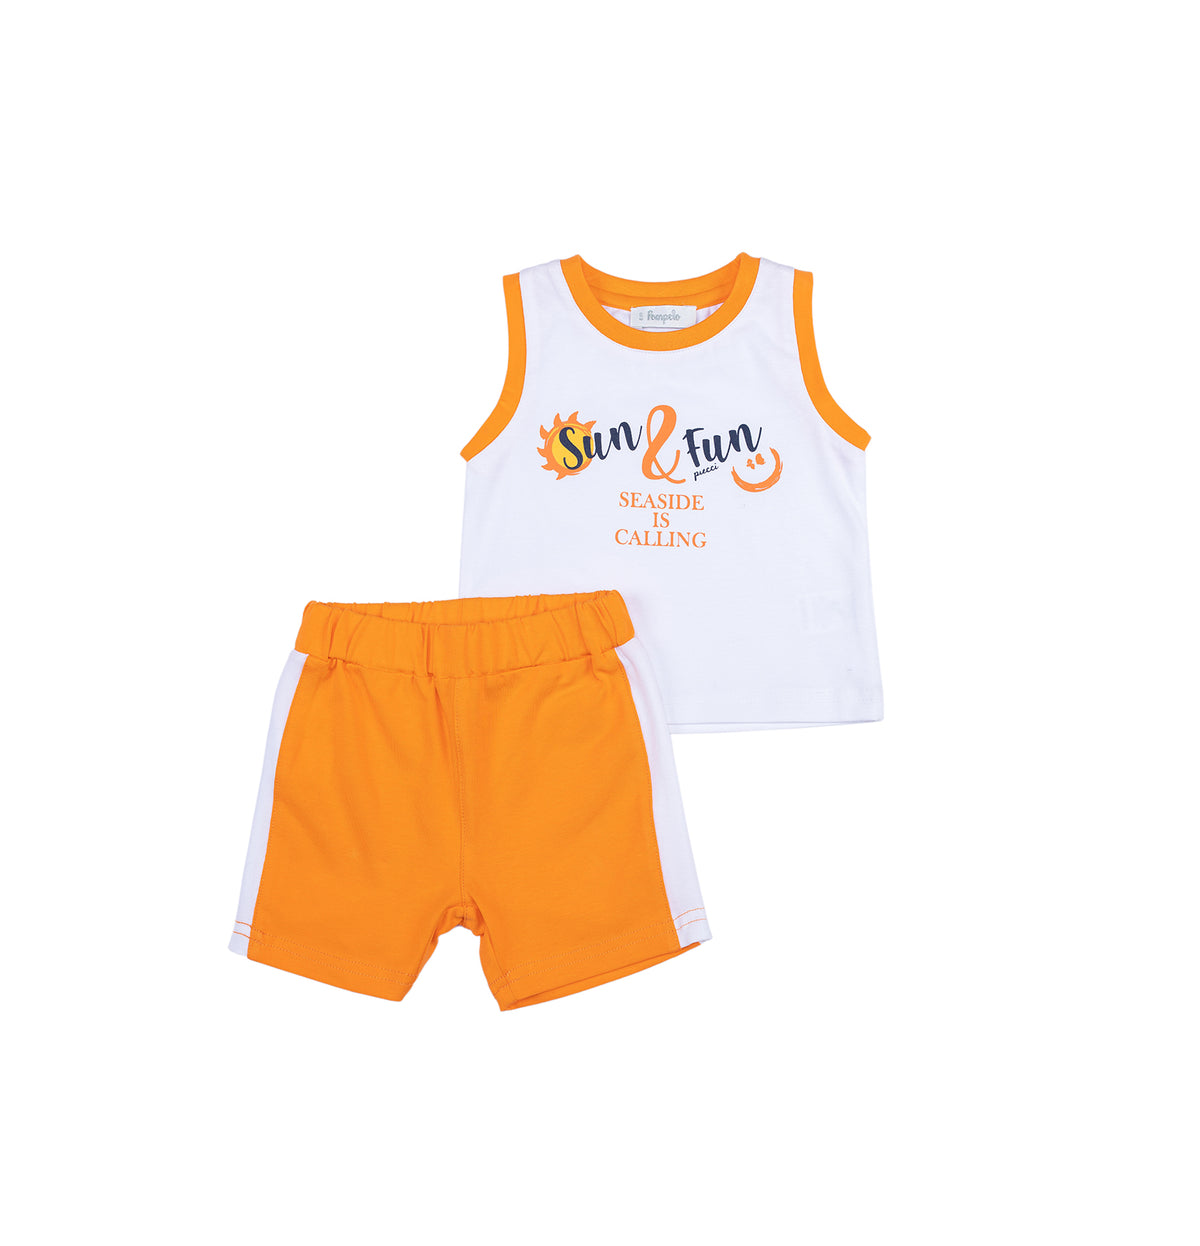 Colorful Babyboy top and short set by Pompelo